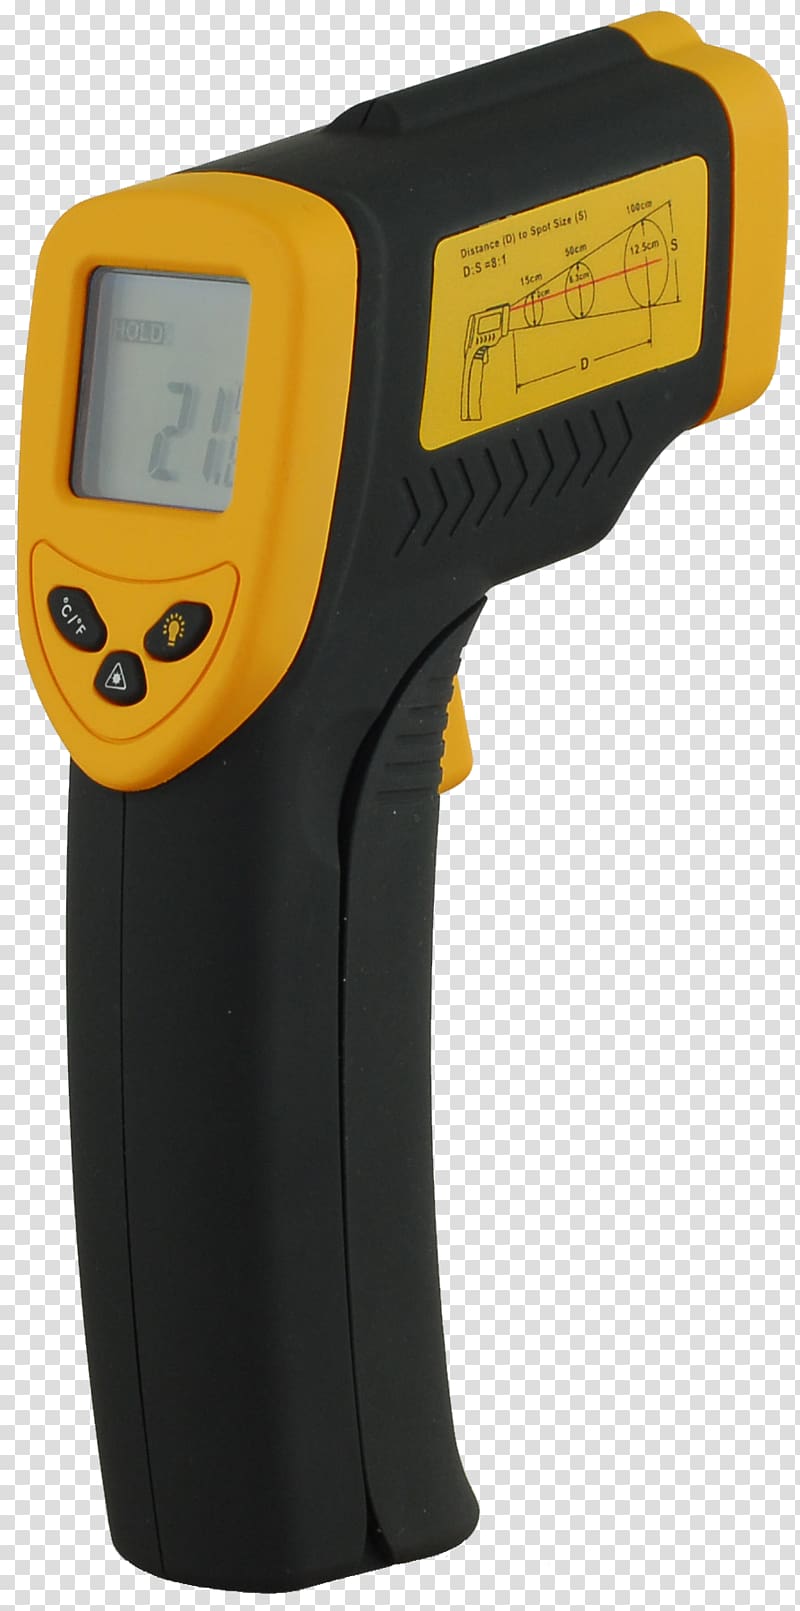 Measuring instrument Infrared Thermometers Pyrometer, Infrared Thermometer transparent background PNG clipart